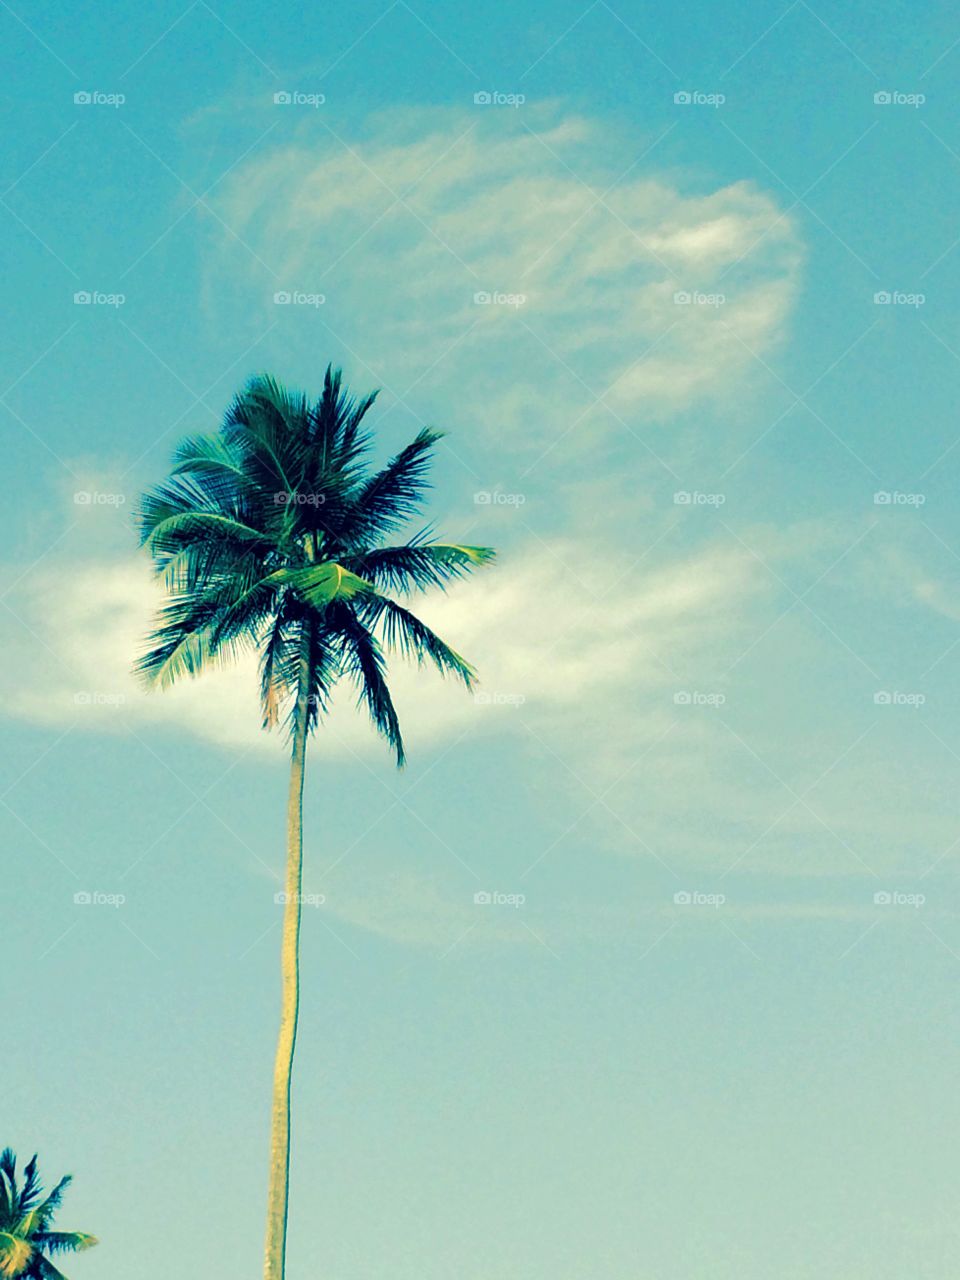 Solo . A single Palm stands solo against the blue sky.